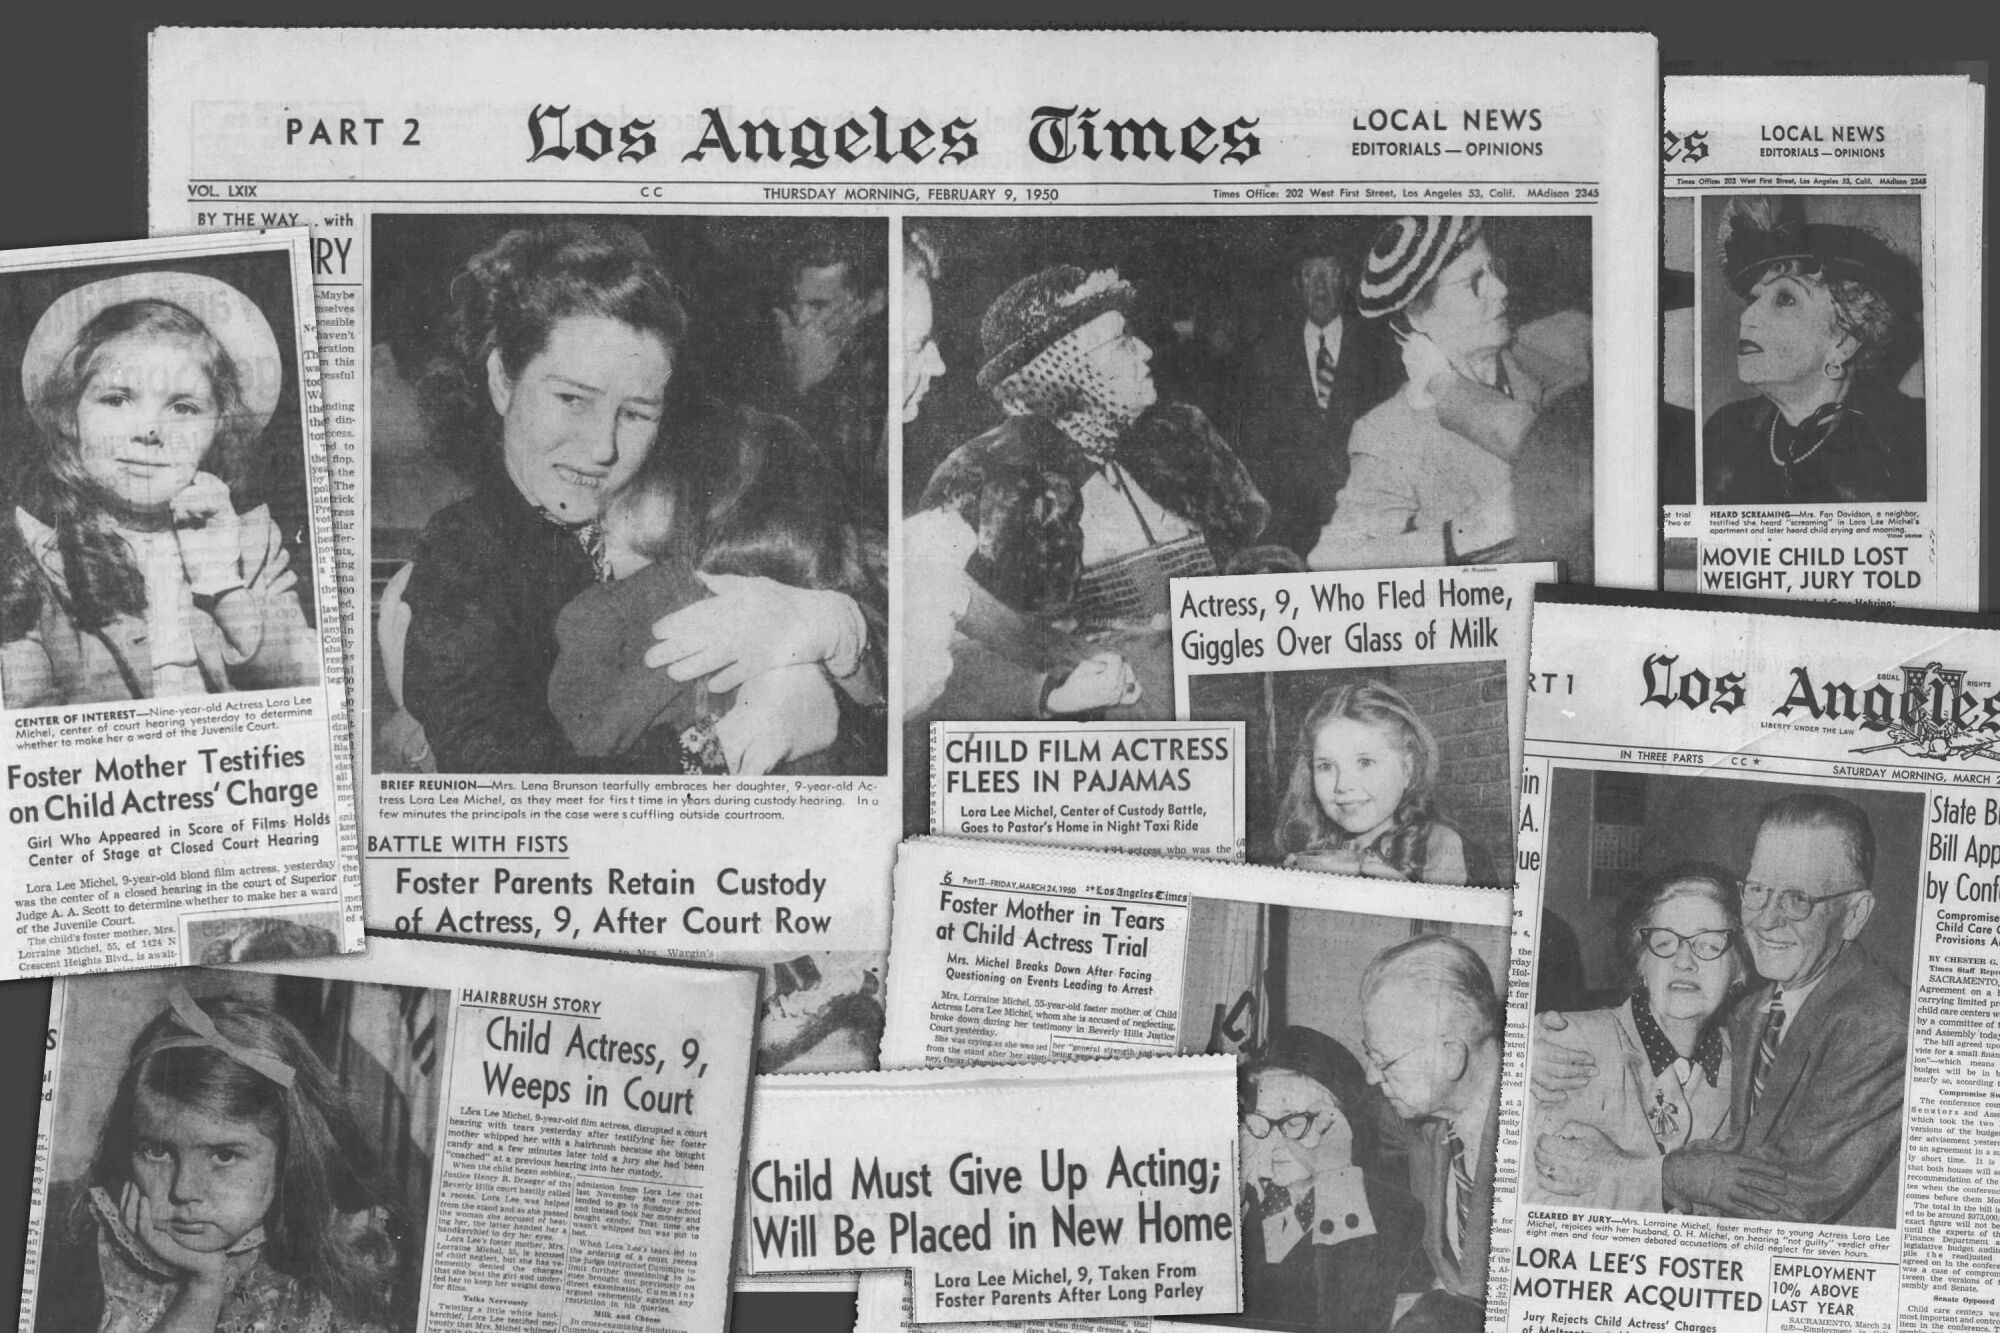 Collage of newspaper clippings featuring Lora Lee Michel.